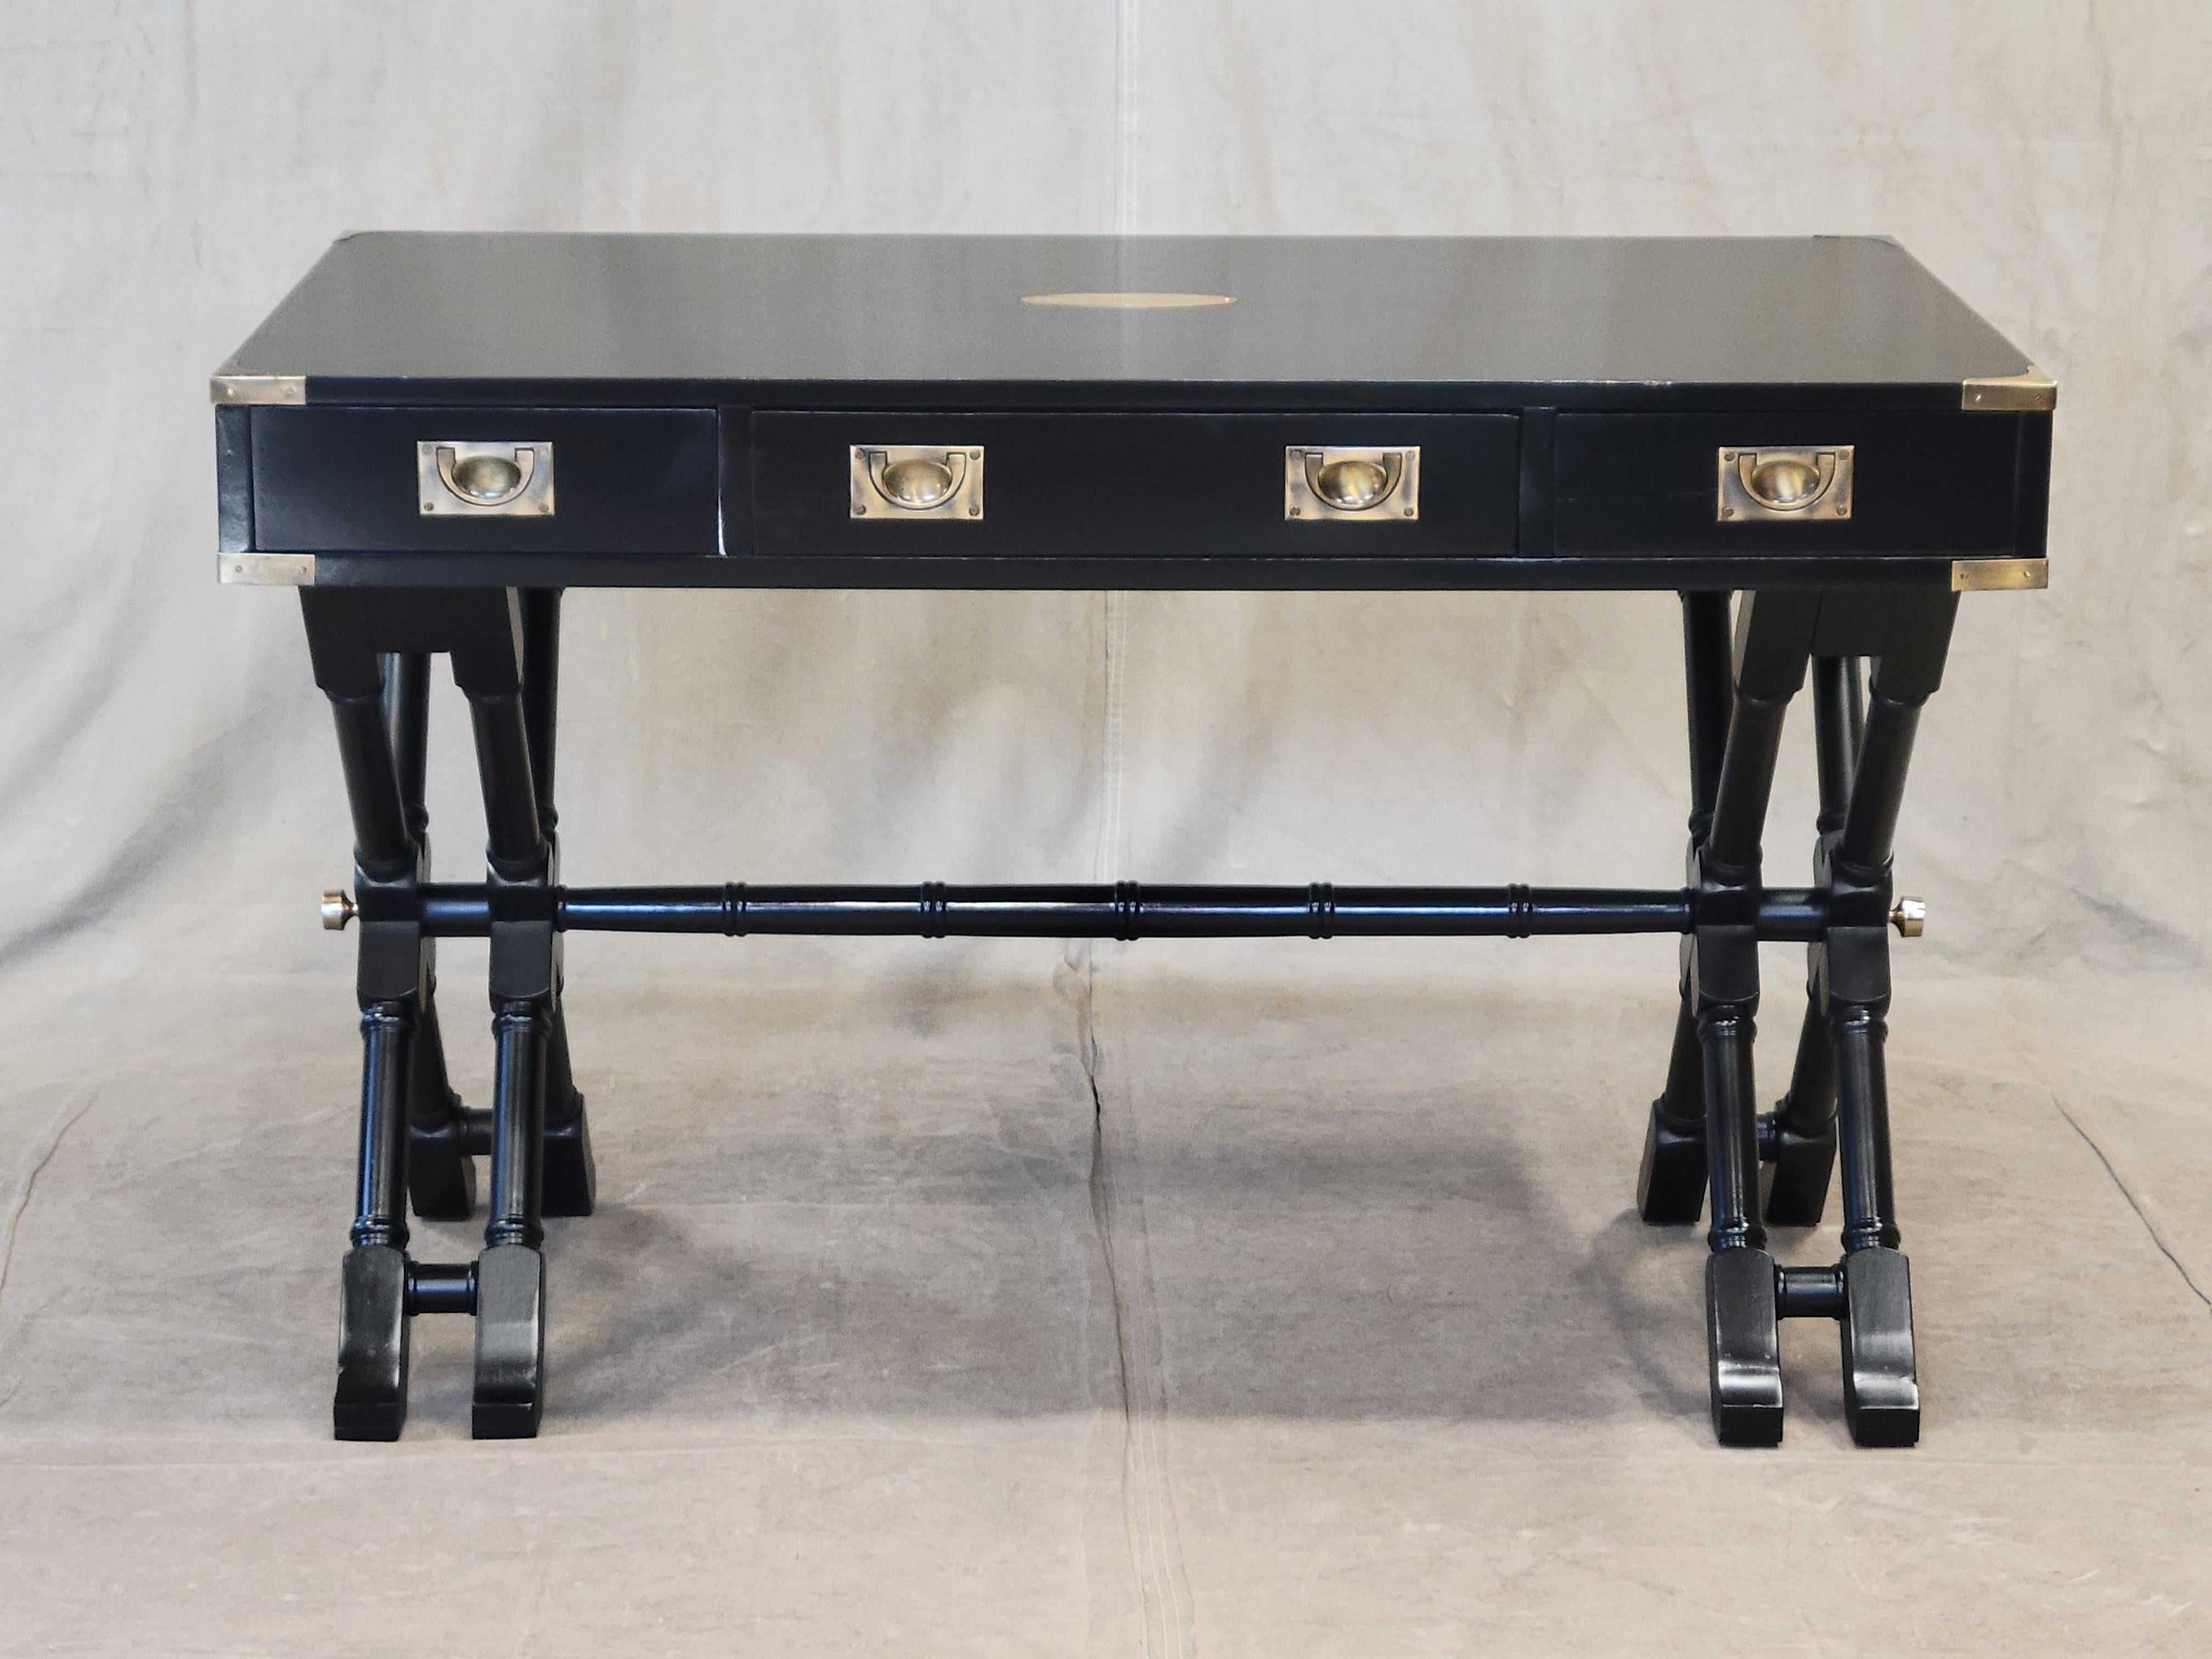 This stunning vintage Bombay Company campaign style writing desk sits on a beautifully carved faux bamboo base. It has been professionally refinished with stunning black lacquer. Original campaign style brass hardware accents contrast beautifully